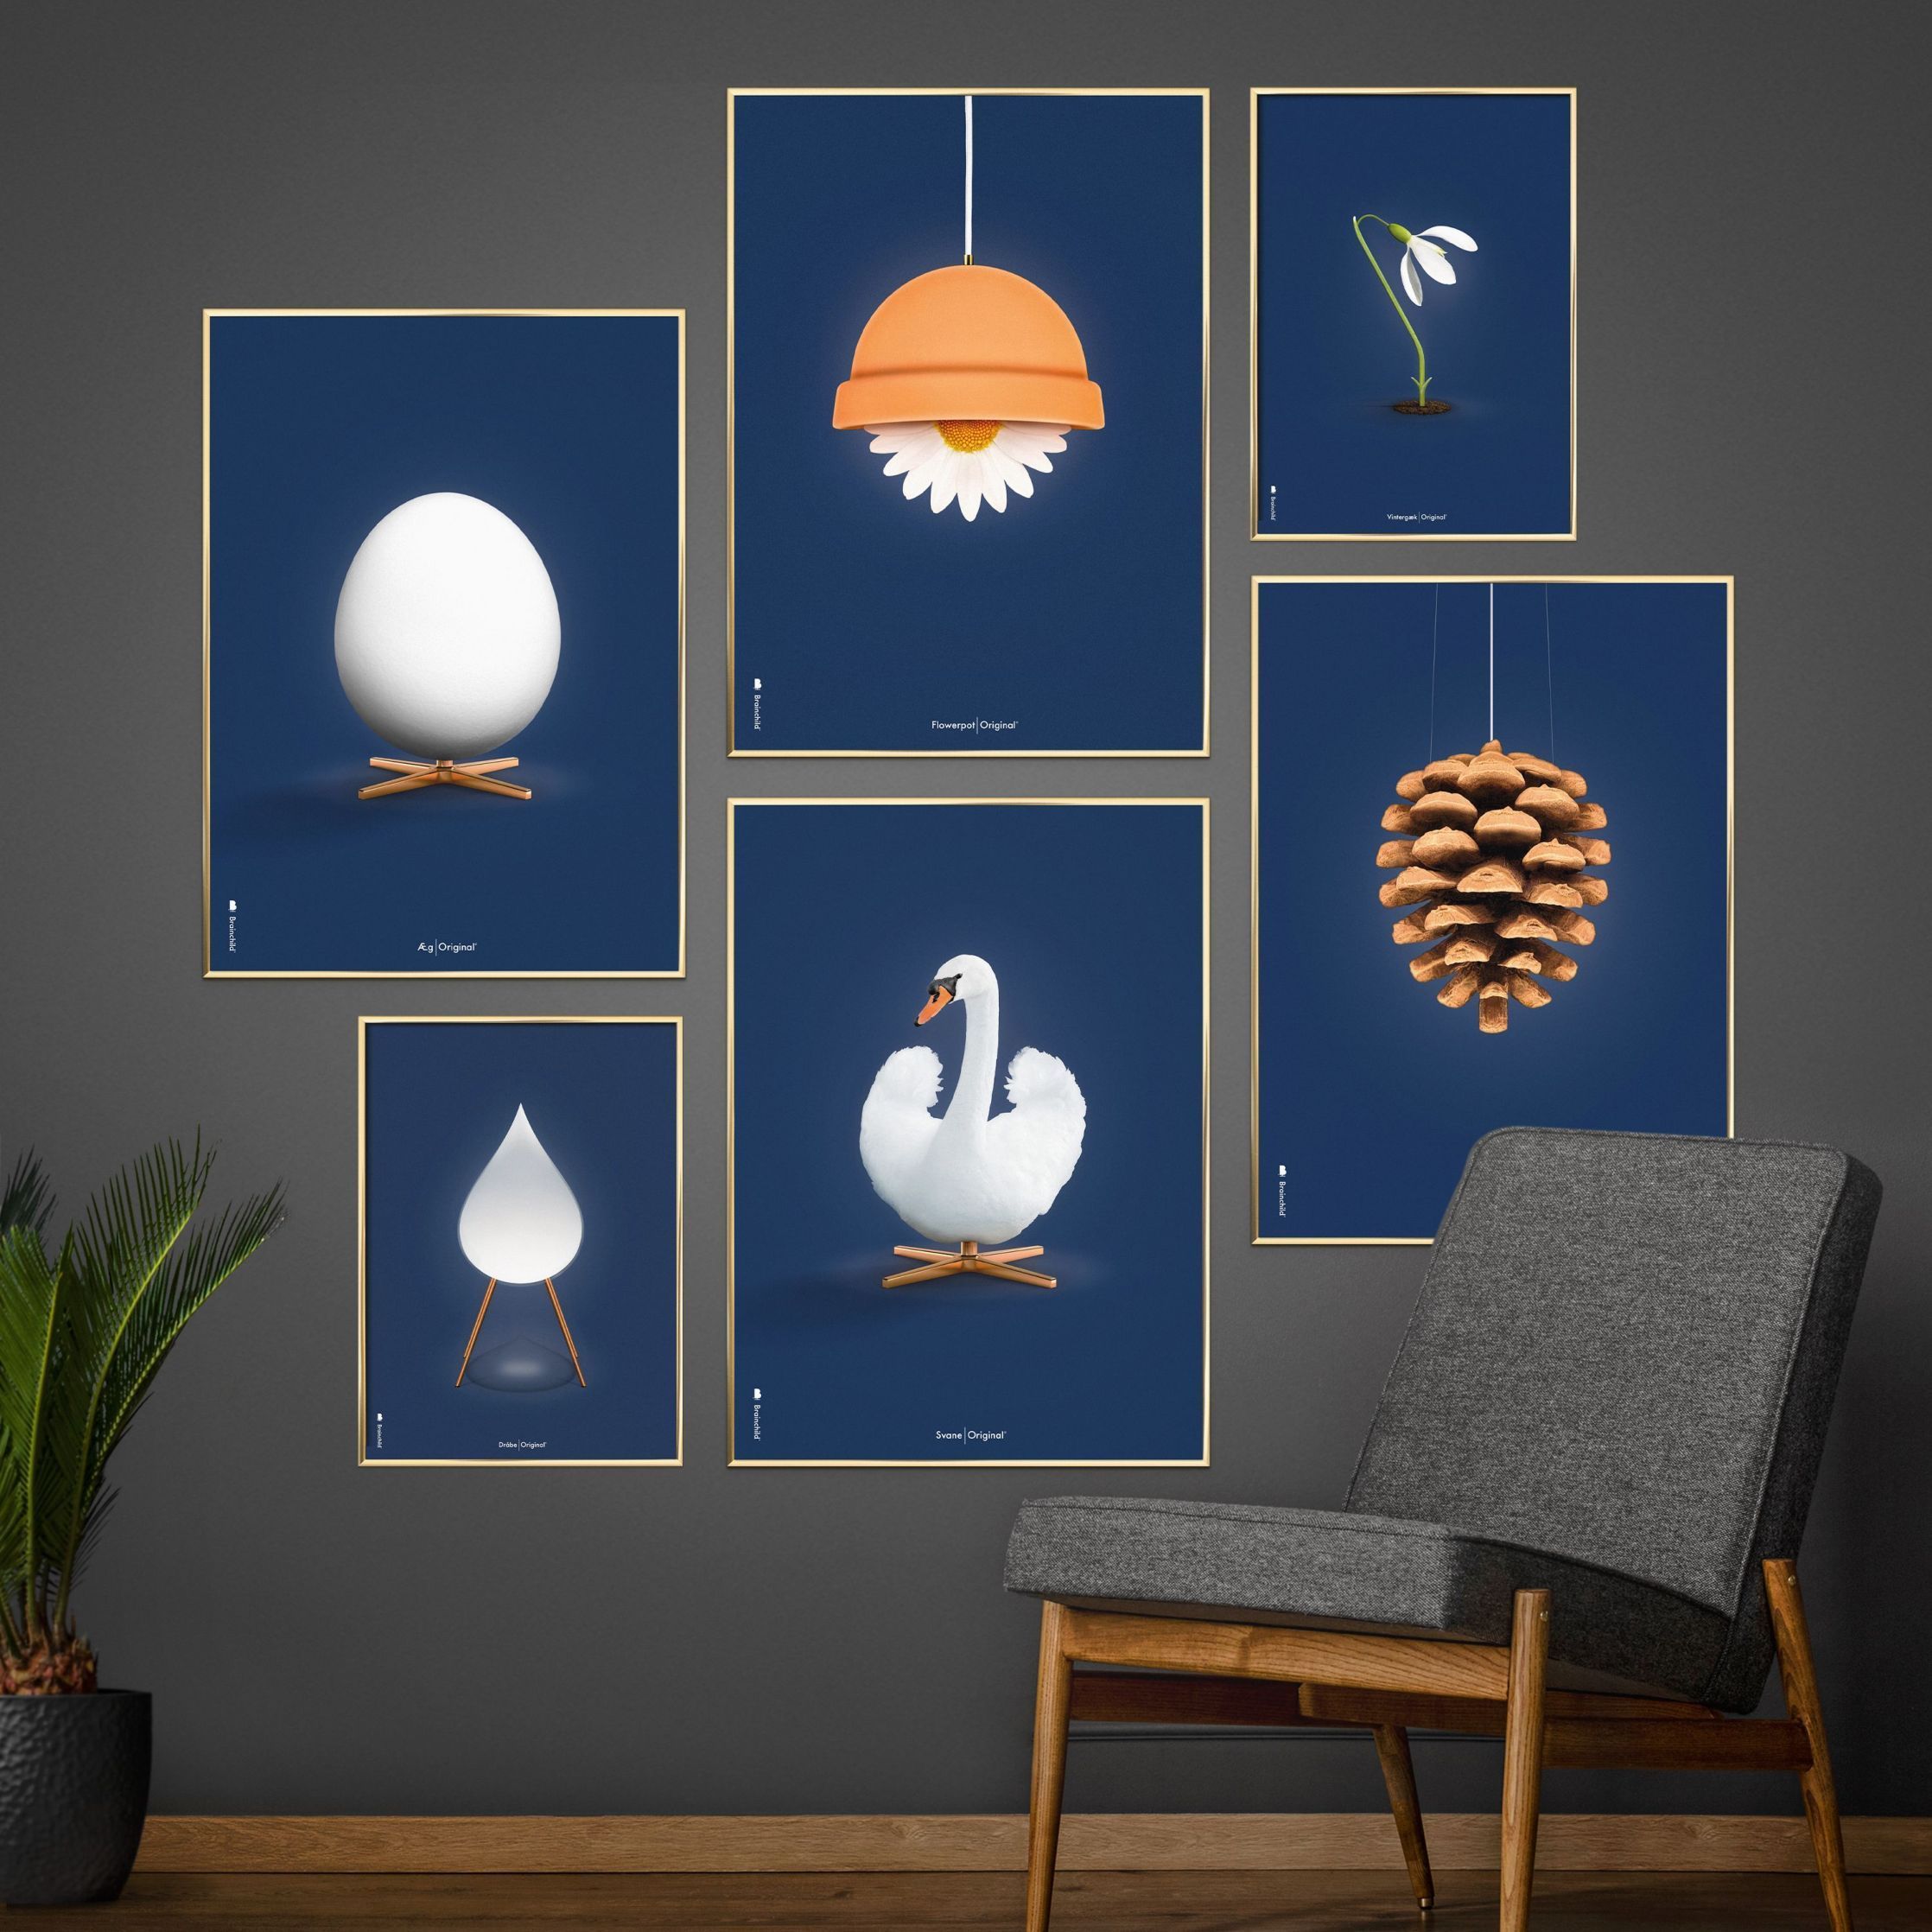 Brainchild Snowdrop Classic Poster, Frame Made Of Black Lacquered Wood 50x70 Cm, Dark Blue Background